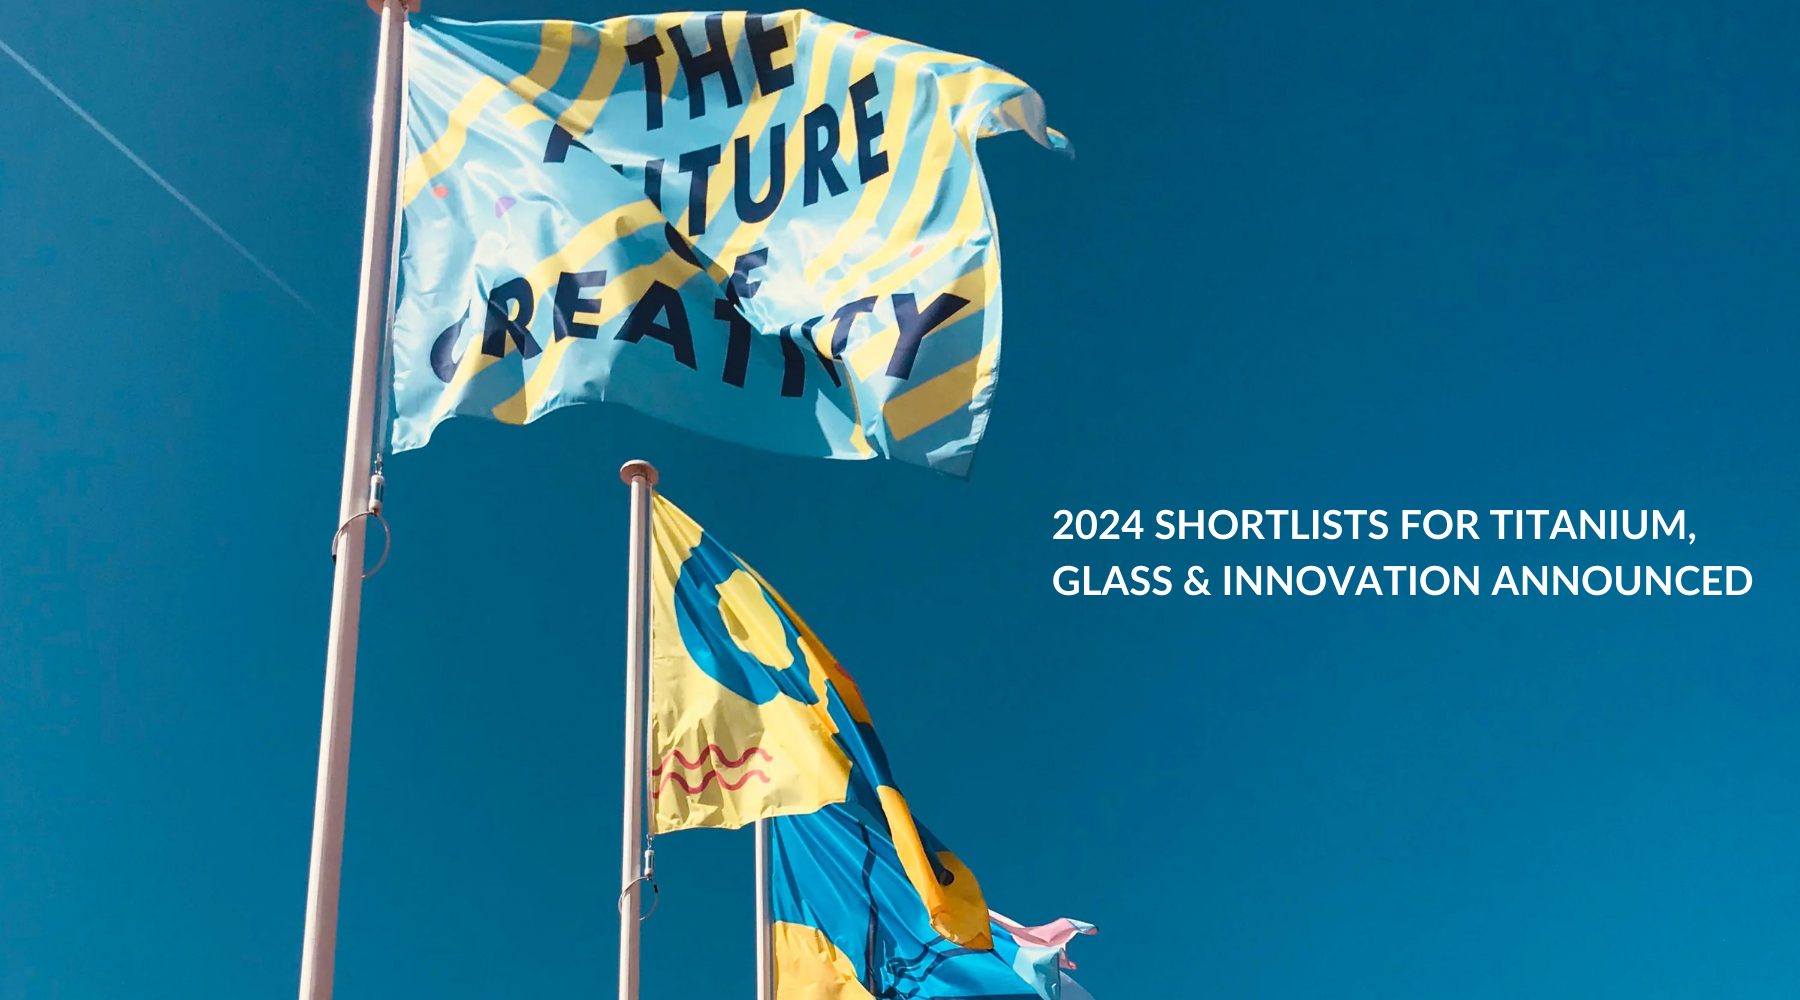 Cannes Lions Announces 2024 Shortlists for Innovation, Titanium and Glass for Change